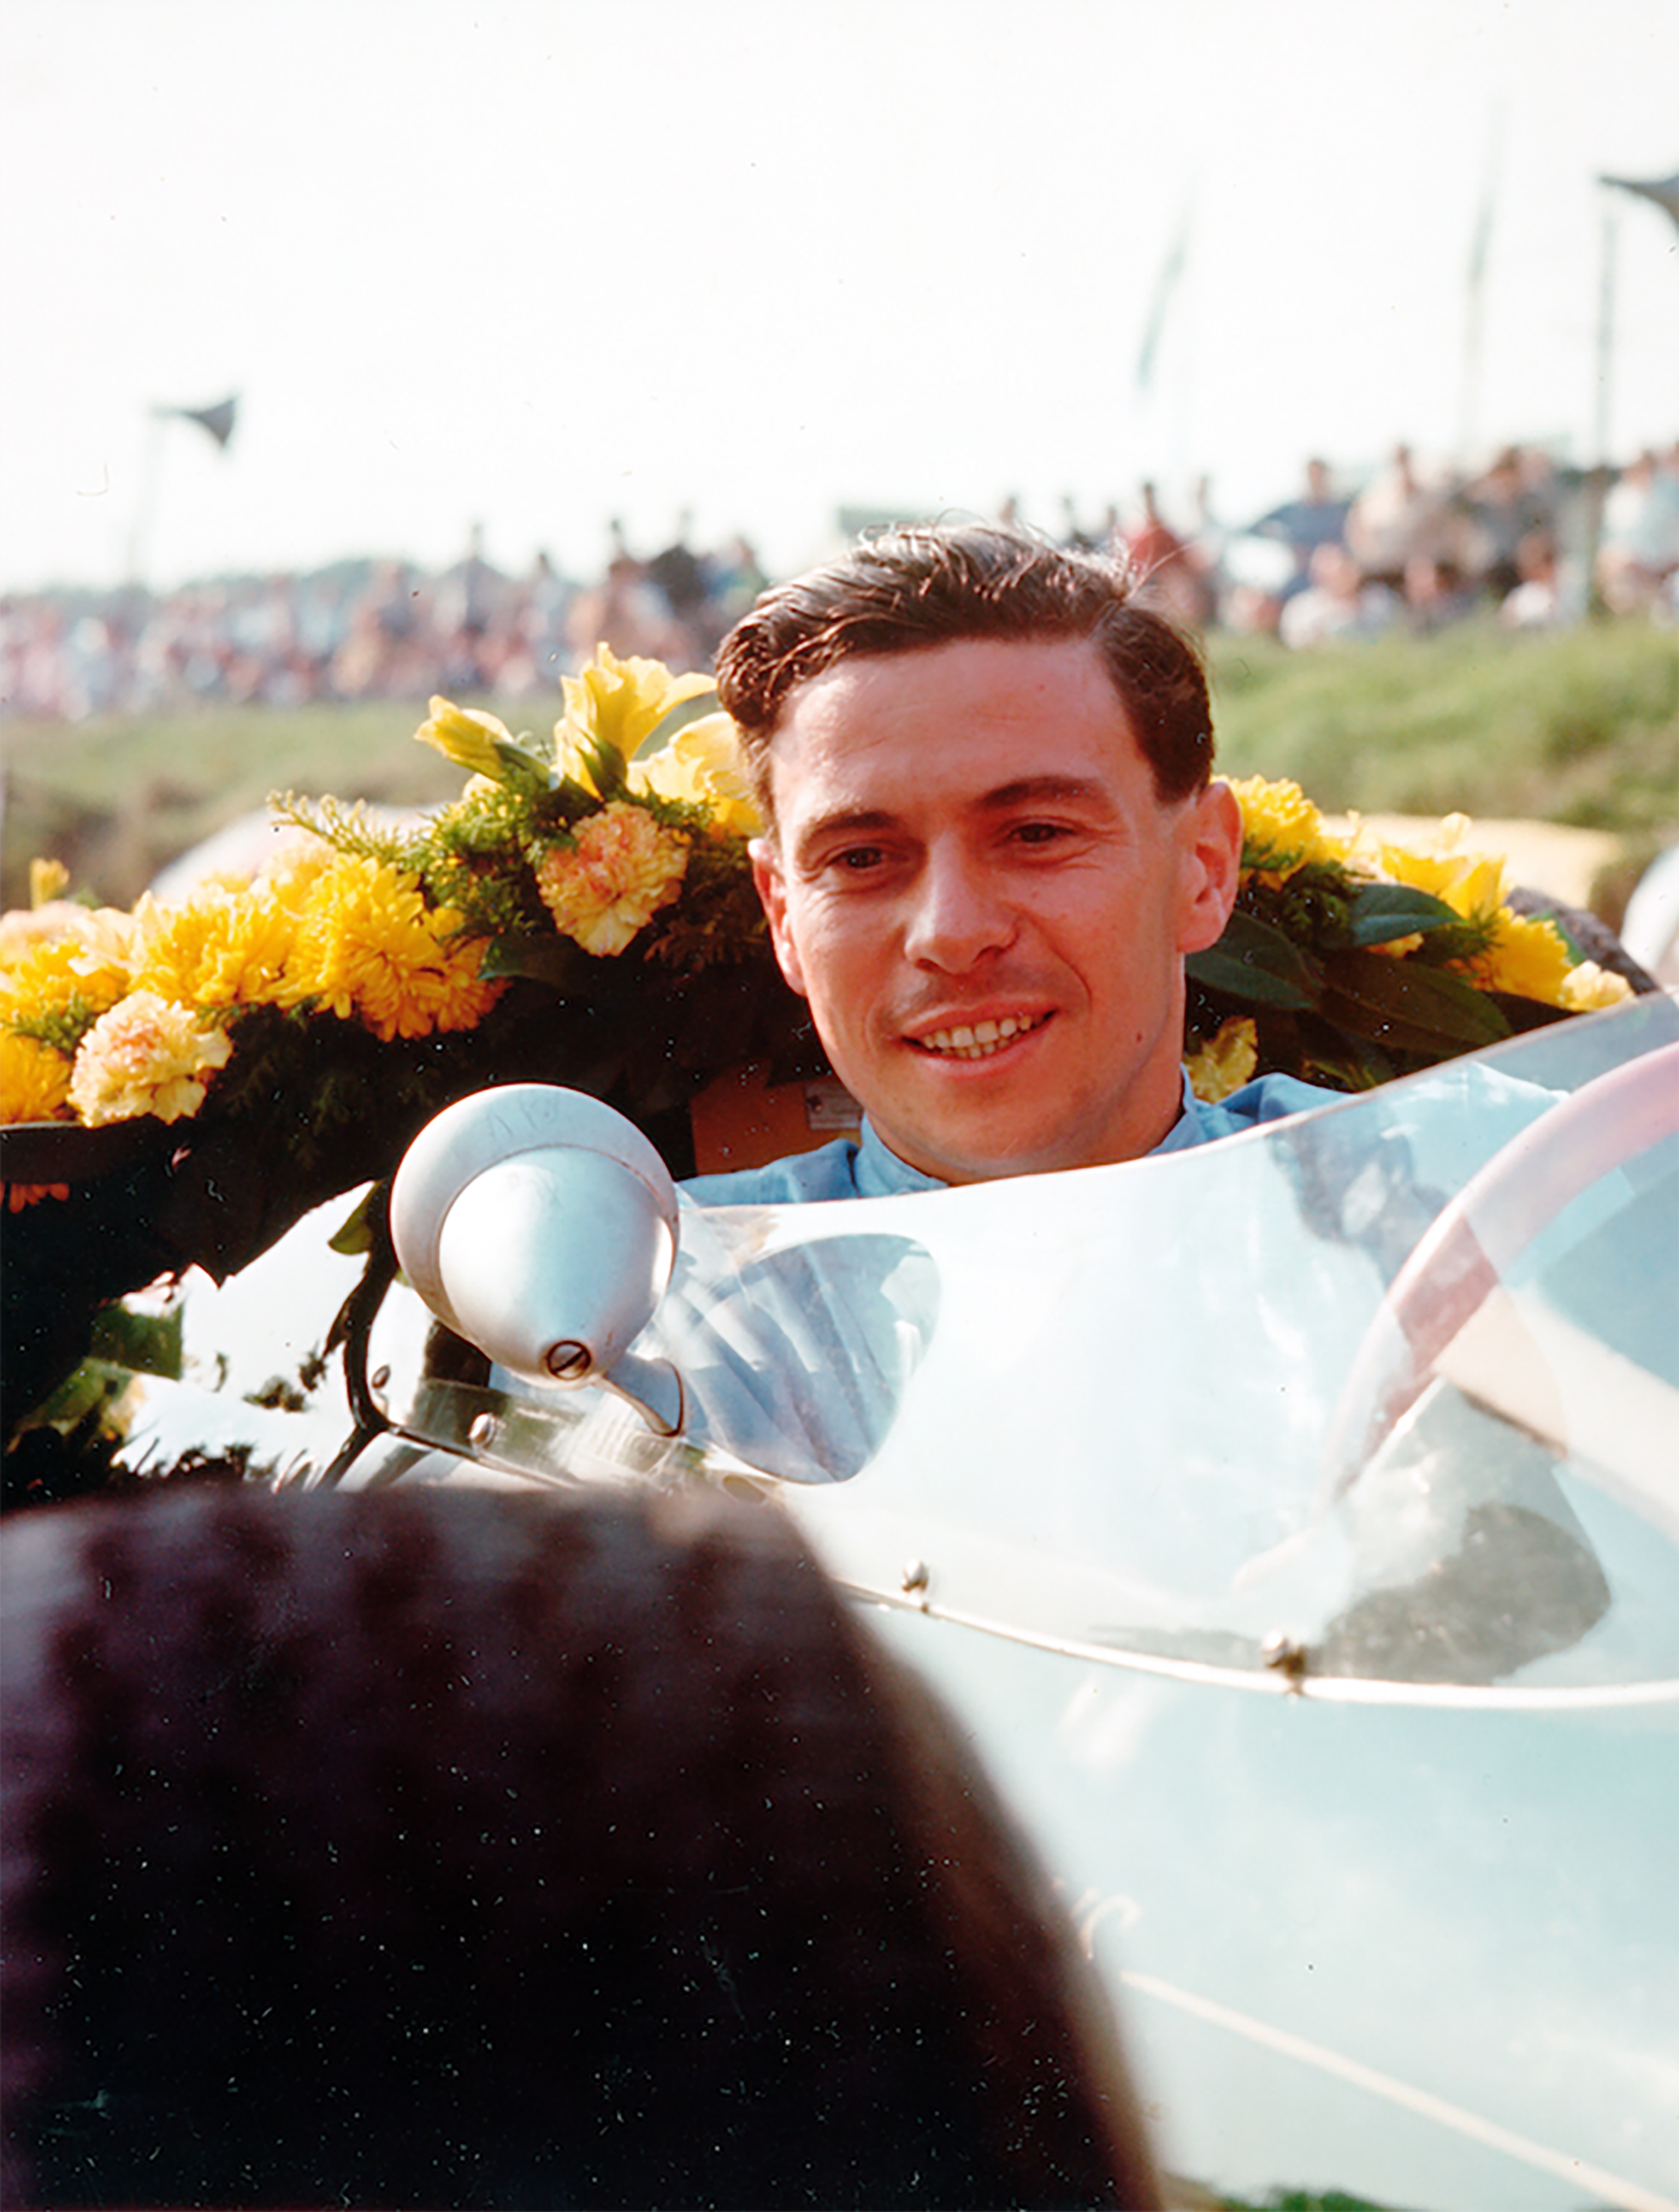 Jimmy with his laurels - such a frequent sight in Formula 1, Formula 2, Formula Junior, touring cars, GT cars, sports cars, Indy cars… during the 1960s...